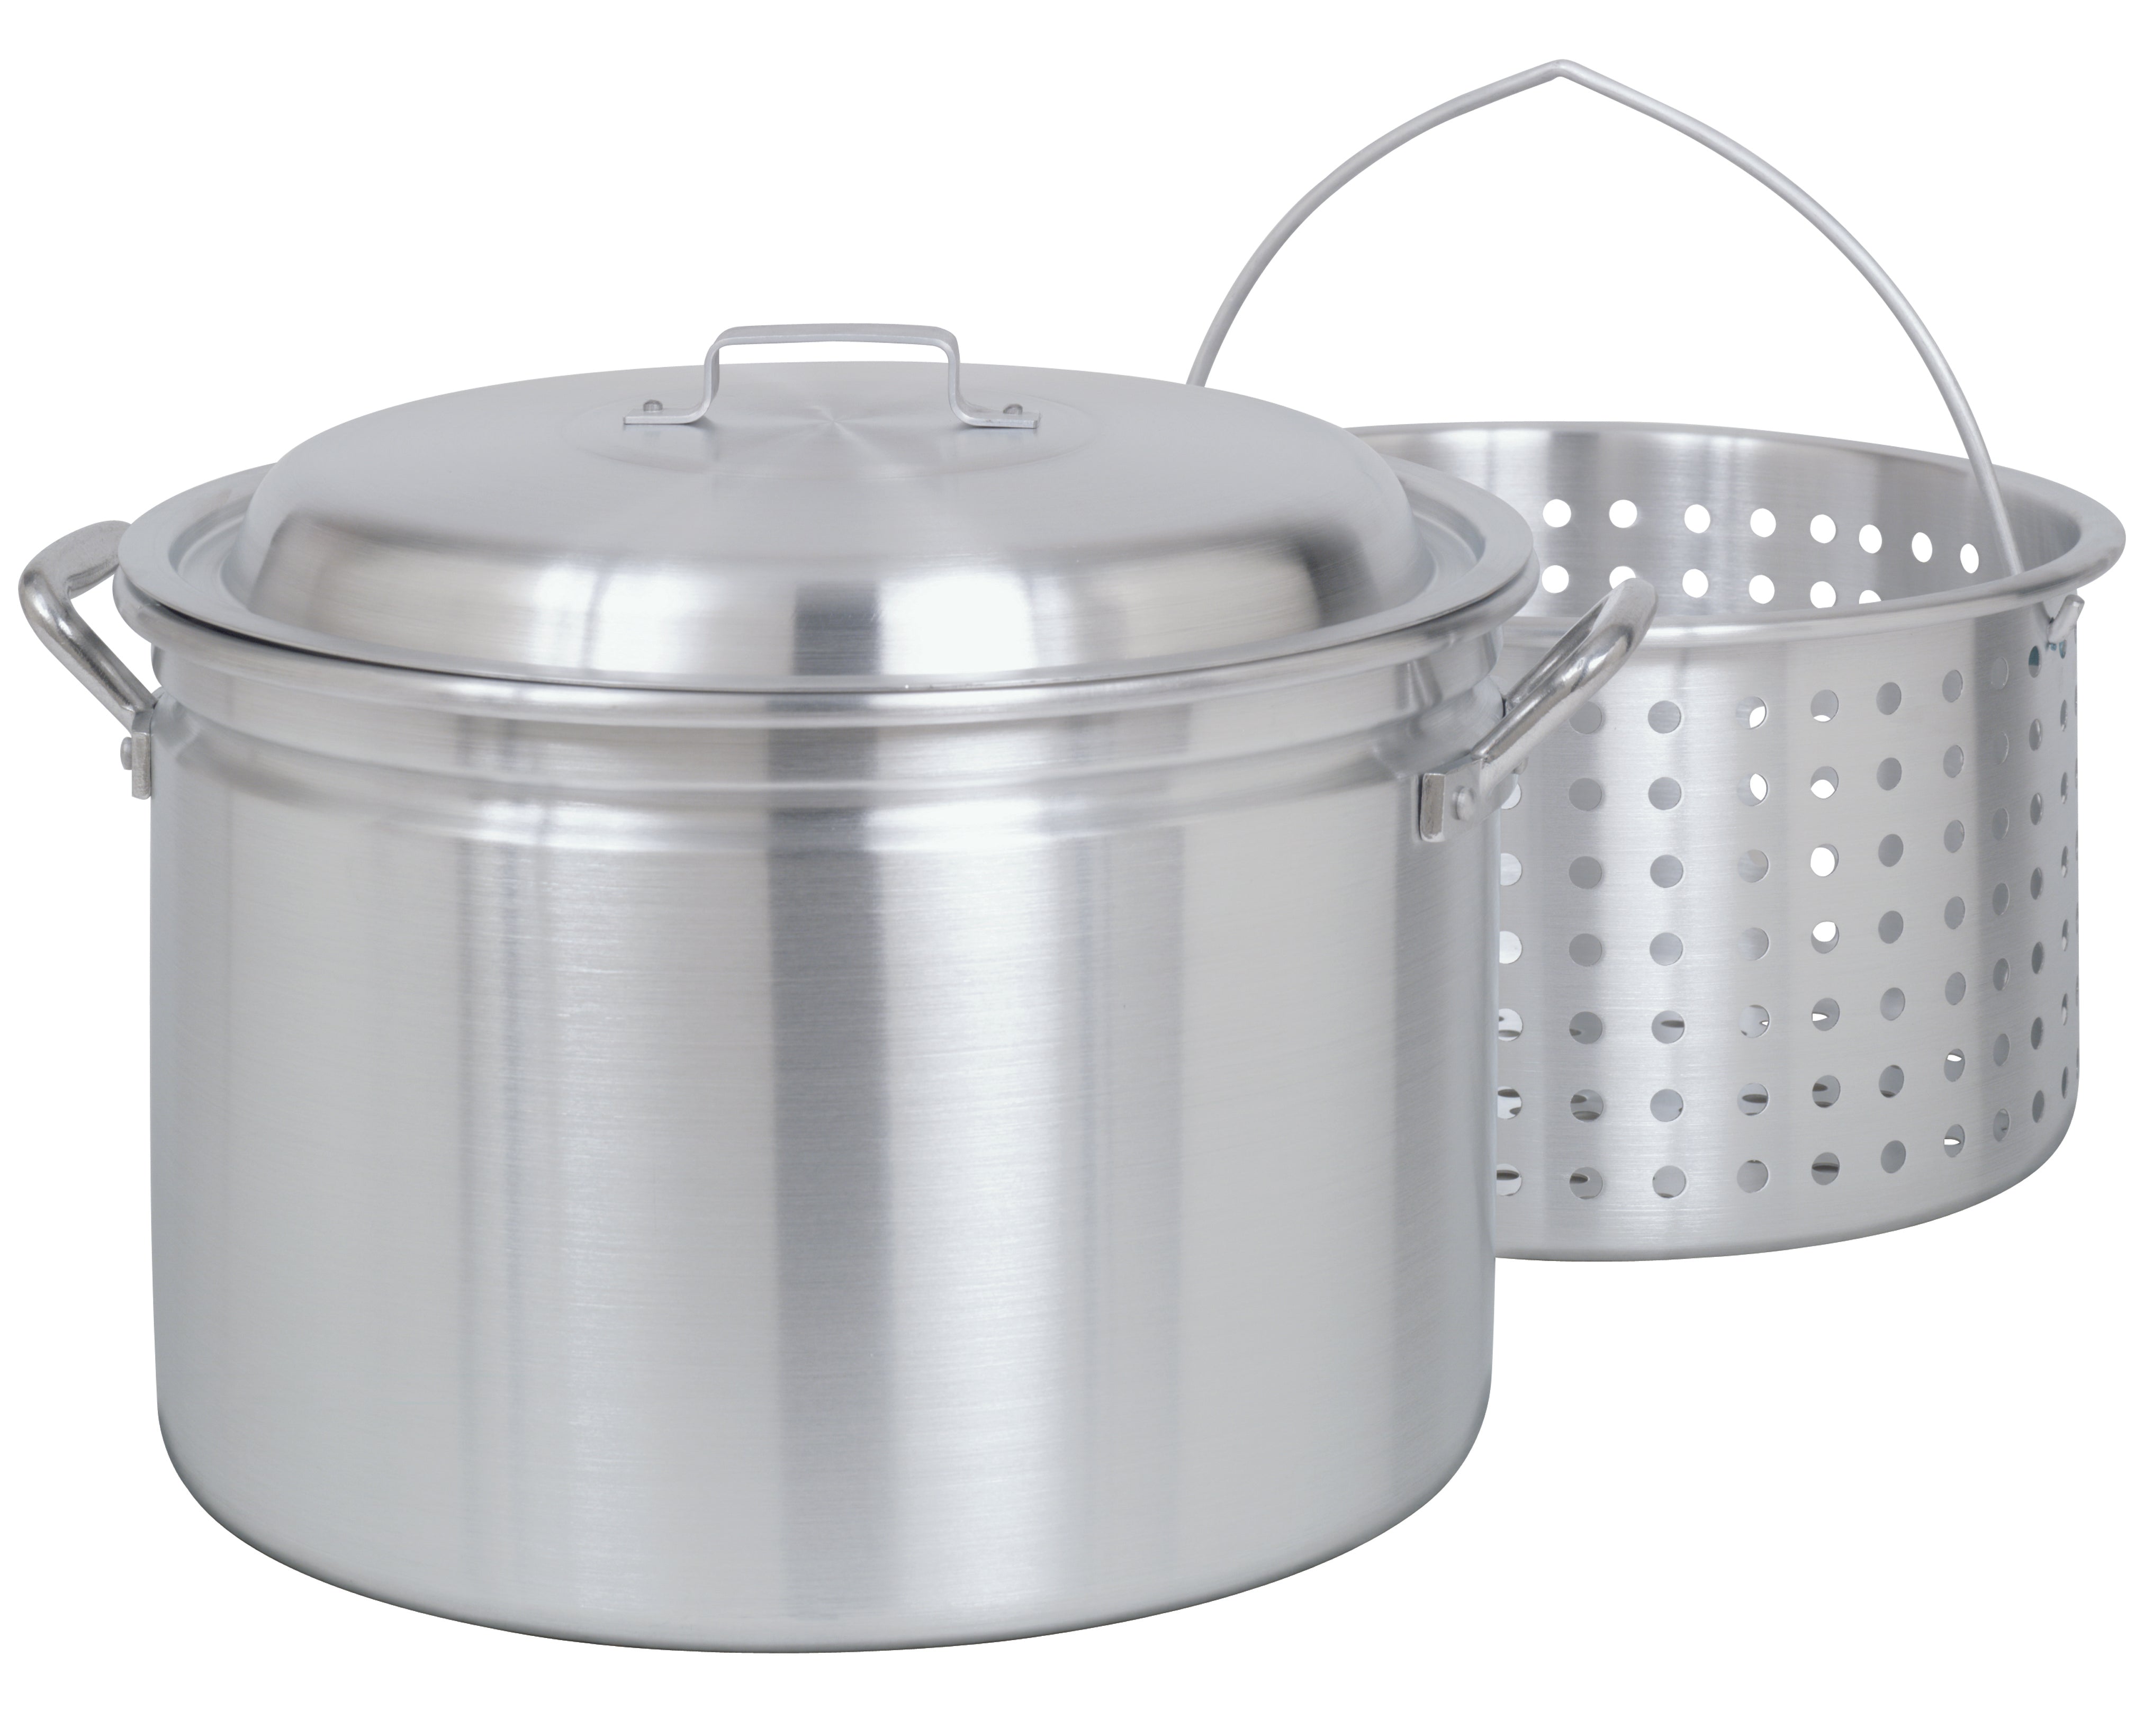 24-qt Aluminum Stockpot with Basket ~ a handcrafted classic